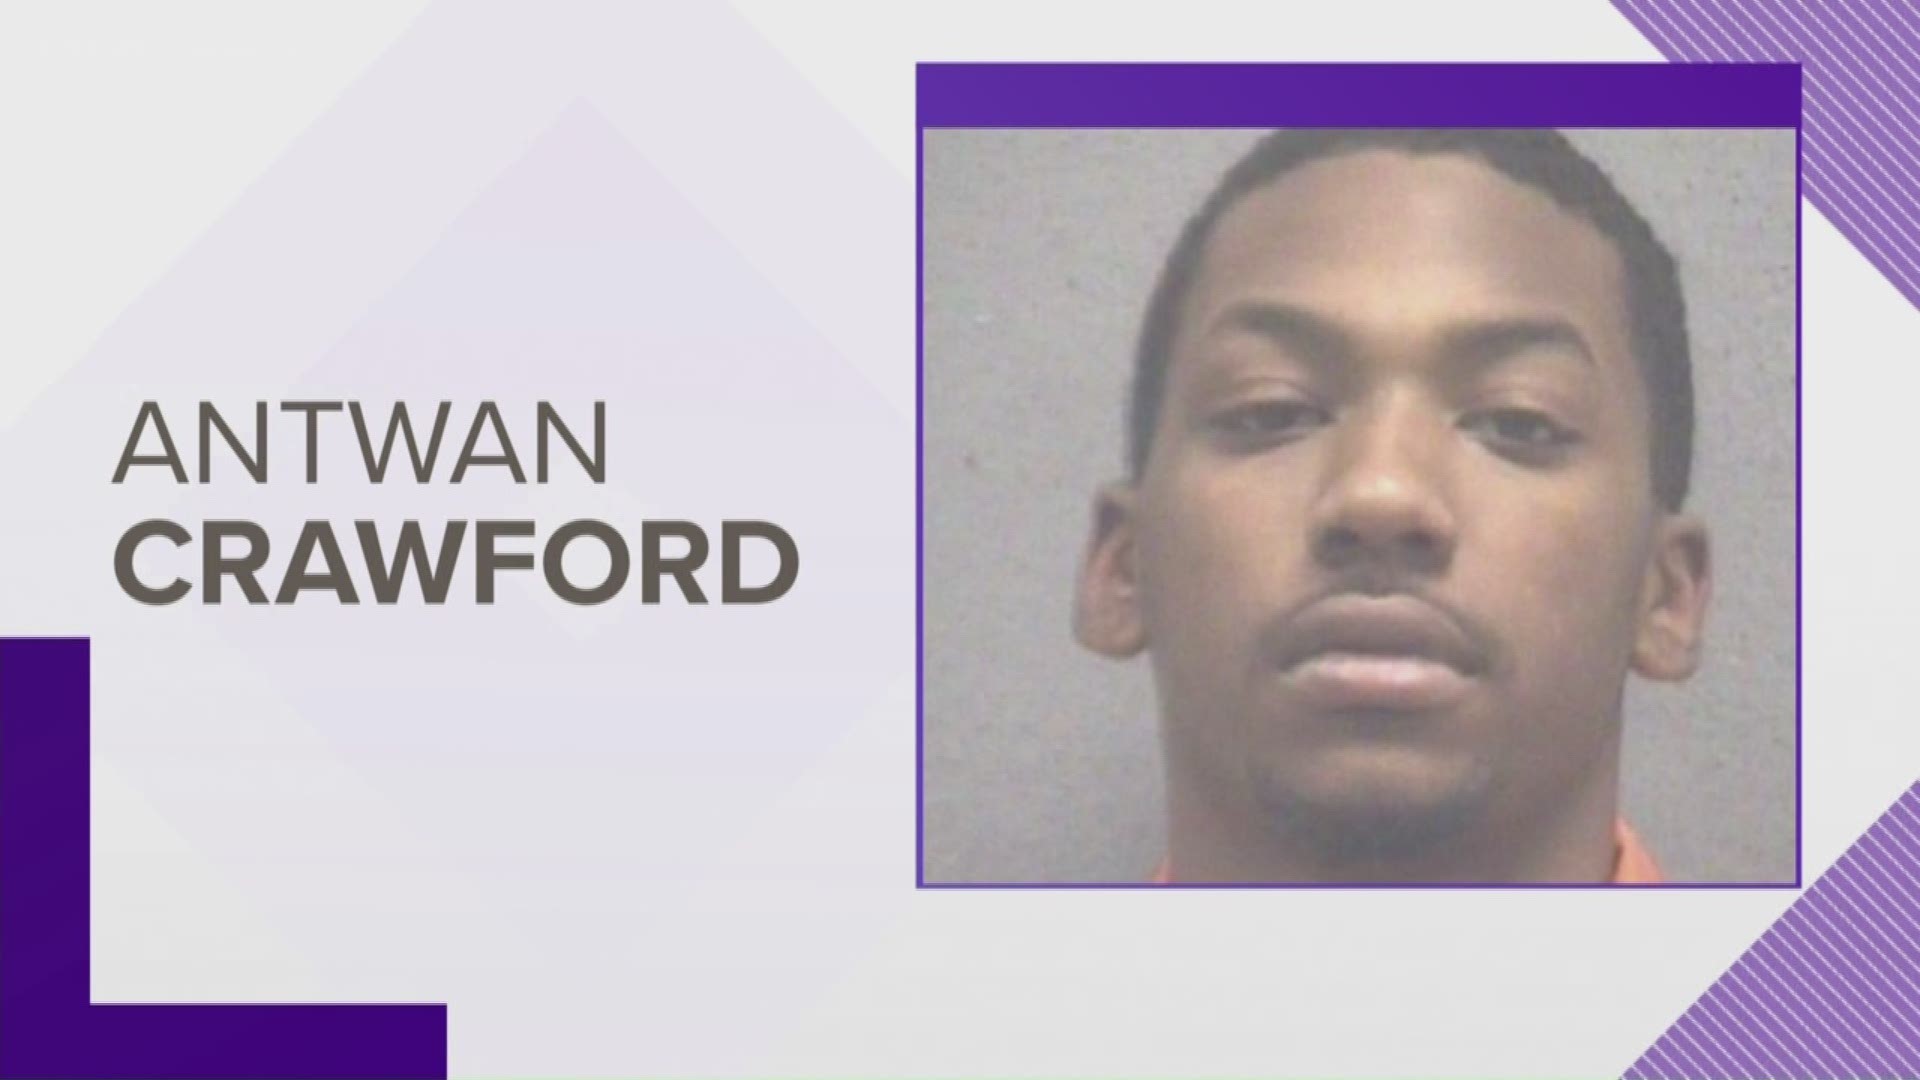 Antwan Crawford faces an open murder charge for the shooting death of 21-year-old Da'Monte Neal.